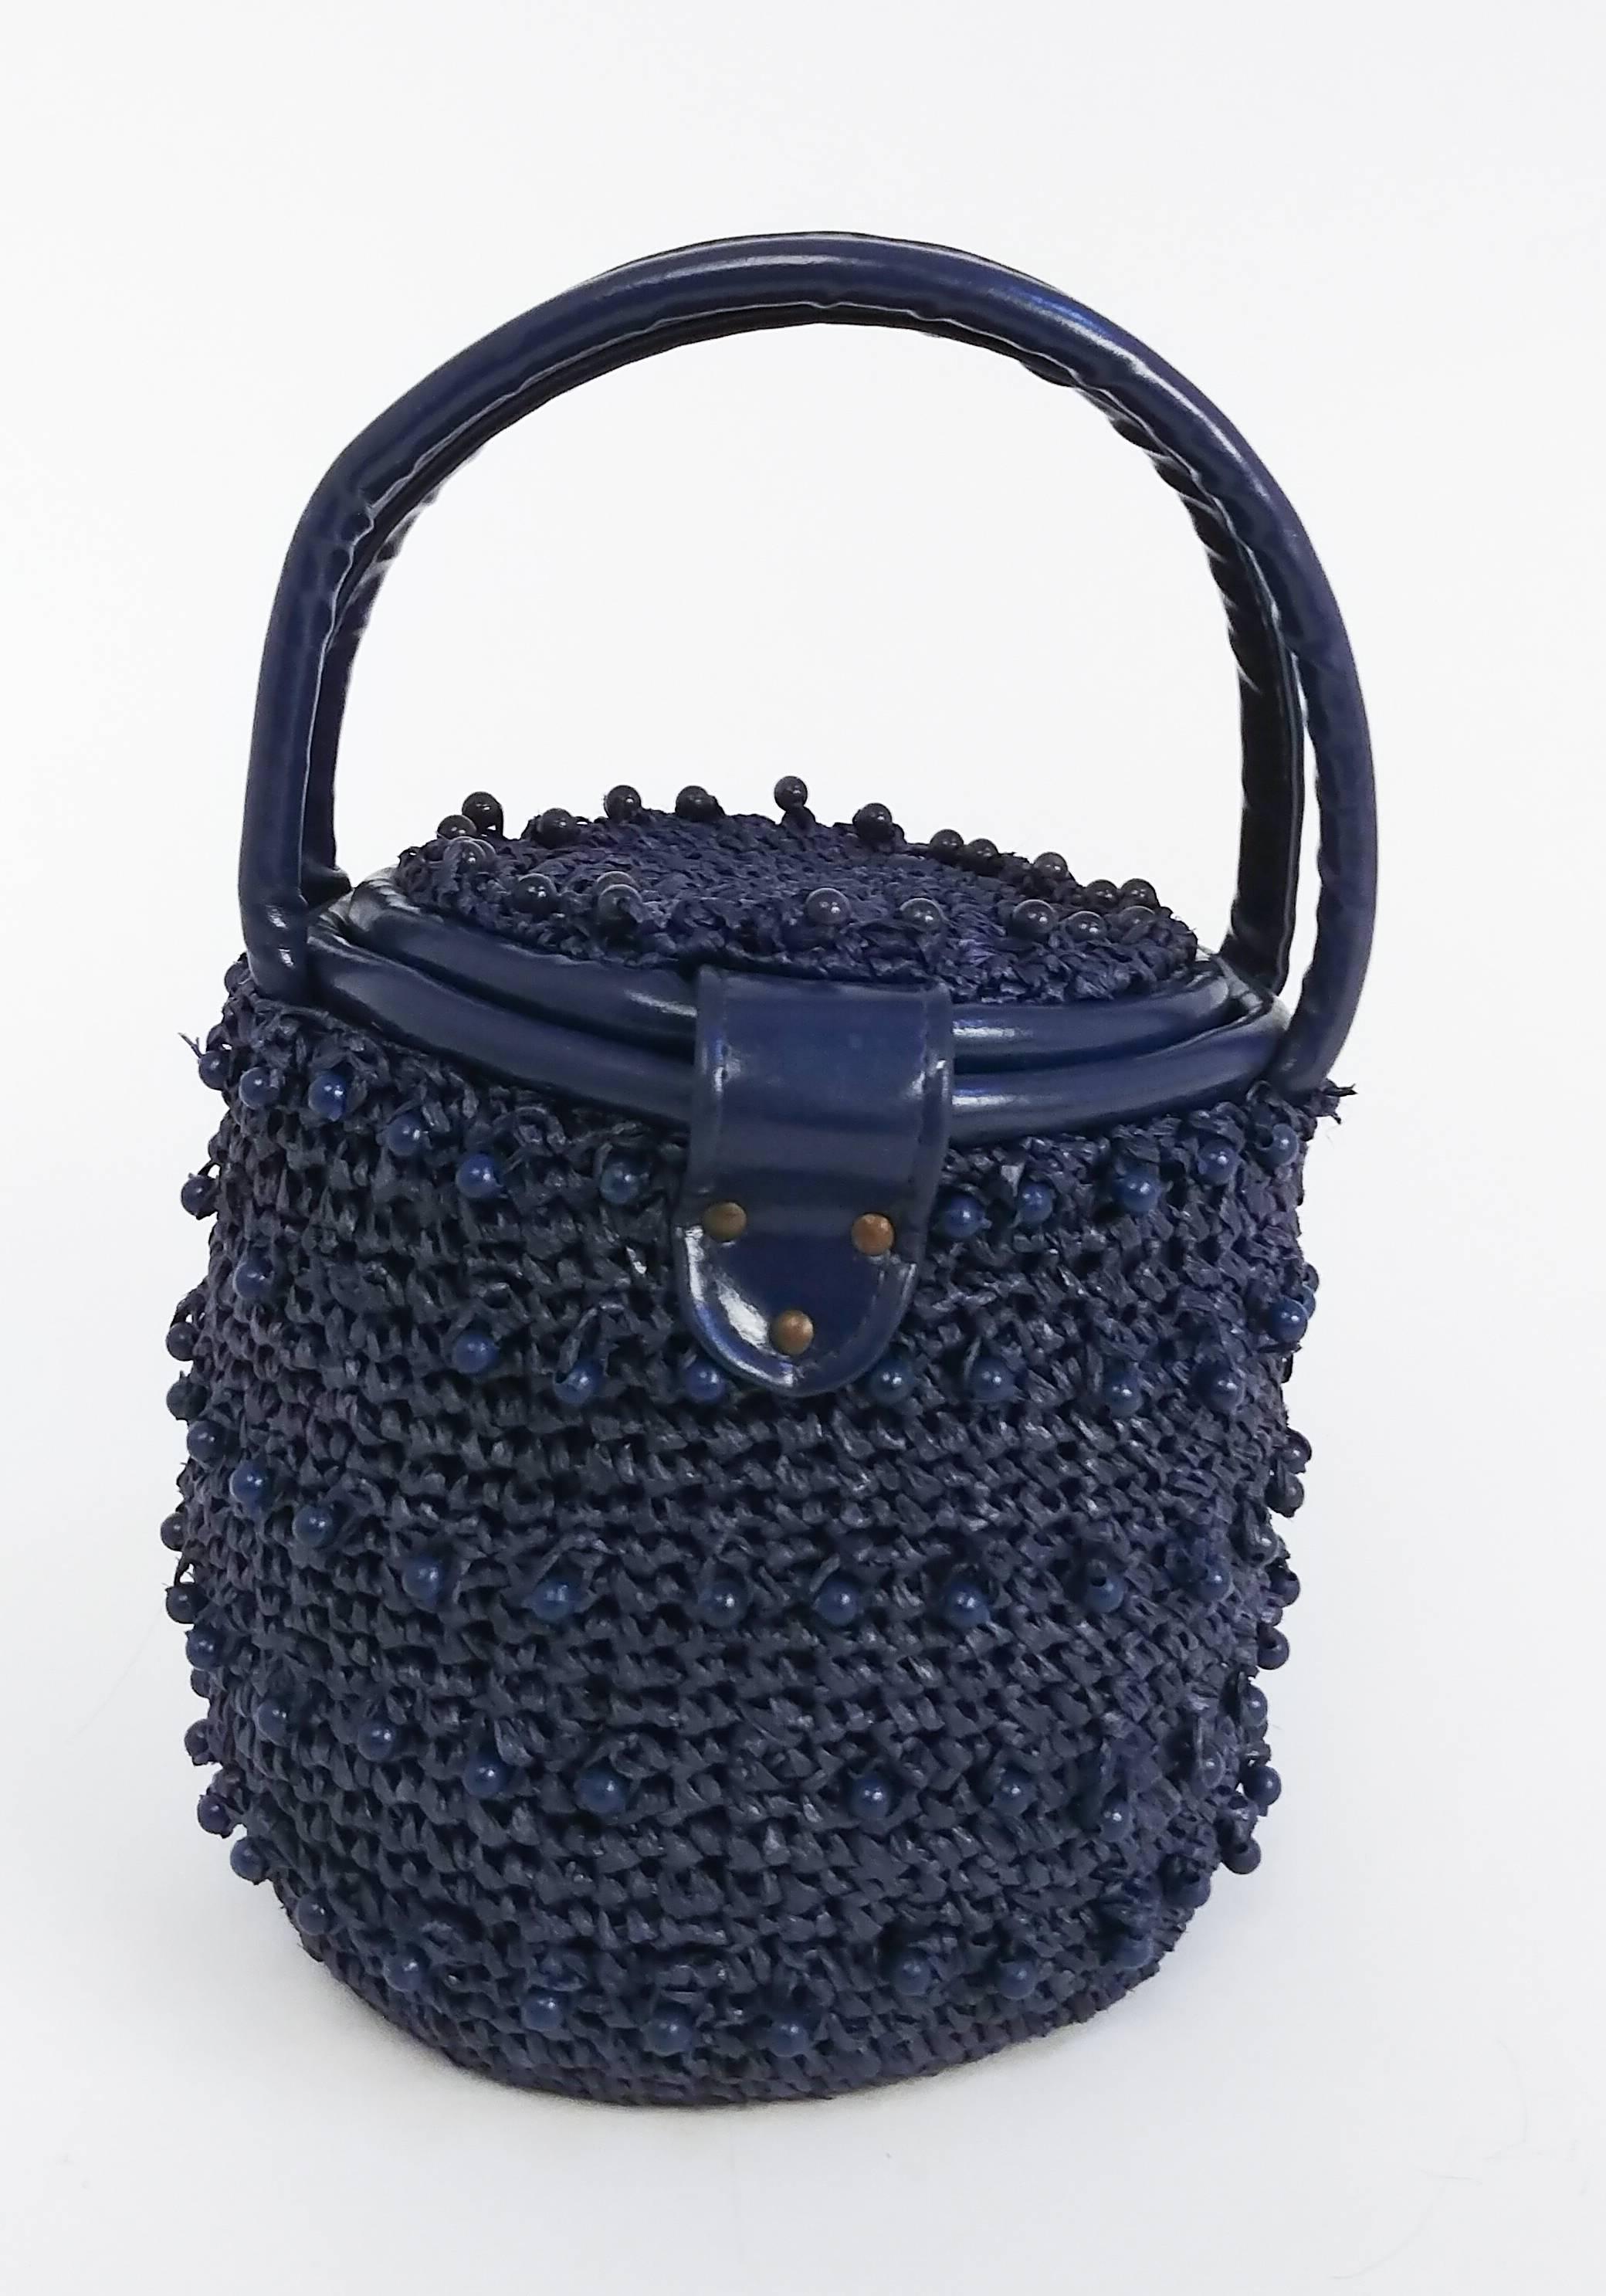 1960s Navy Raffia Woven Basket Purse. Wooden beads woven throughout. Leather straps, gold toned hardware. Clasp twists open and top flips up. Lined with cotton w/ one side inner pocket. 